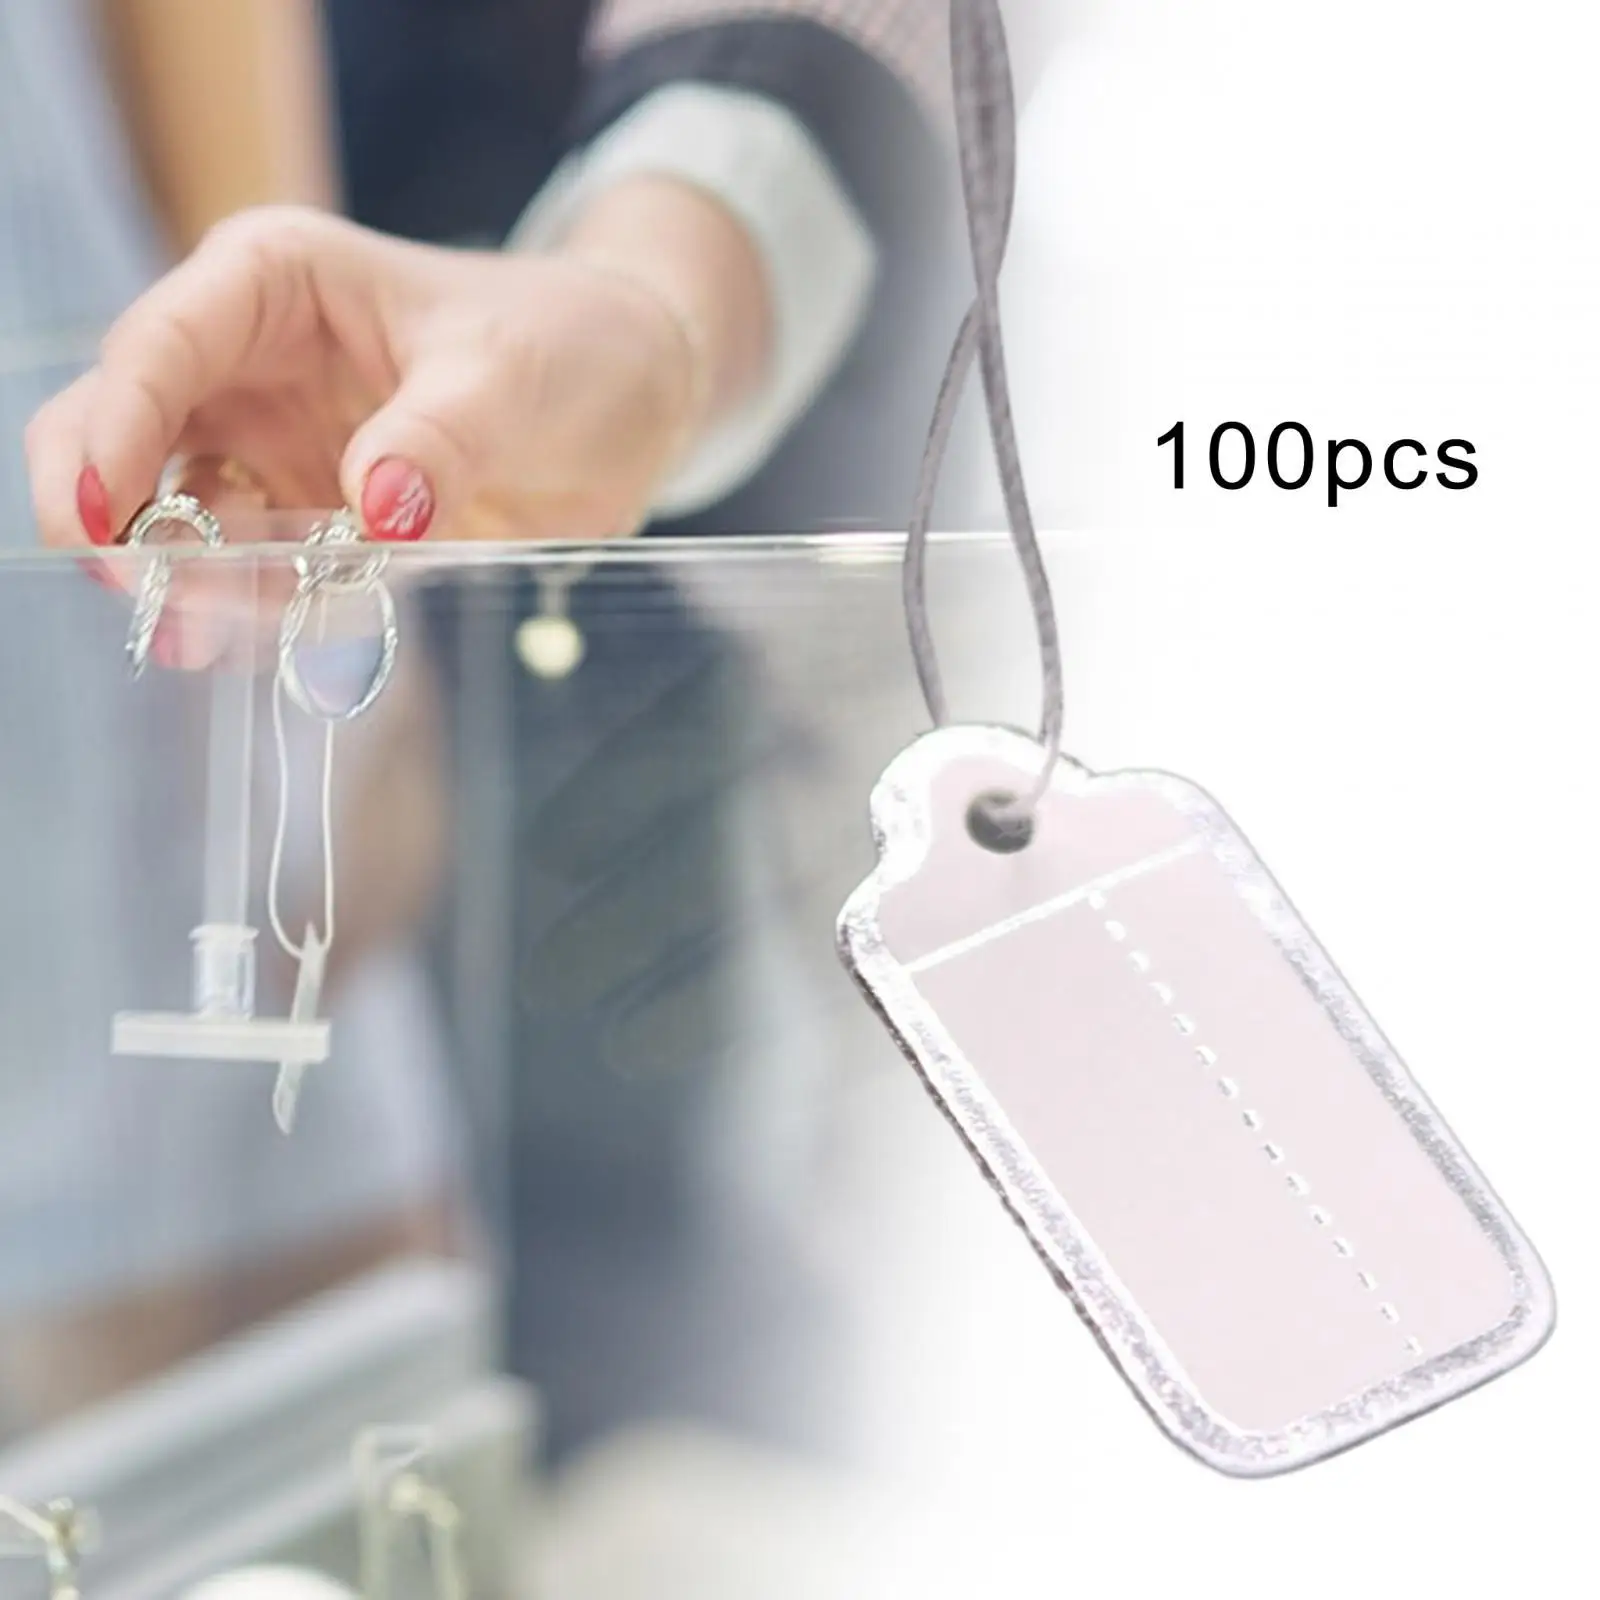 100 Pieces Price Tags Paper Tags Gift Tags Marking Strung Tags Jewelry Clothing Tags for Earrings Retail Product Wedding Rings